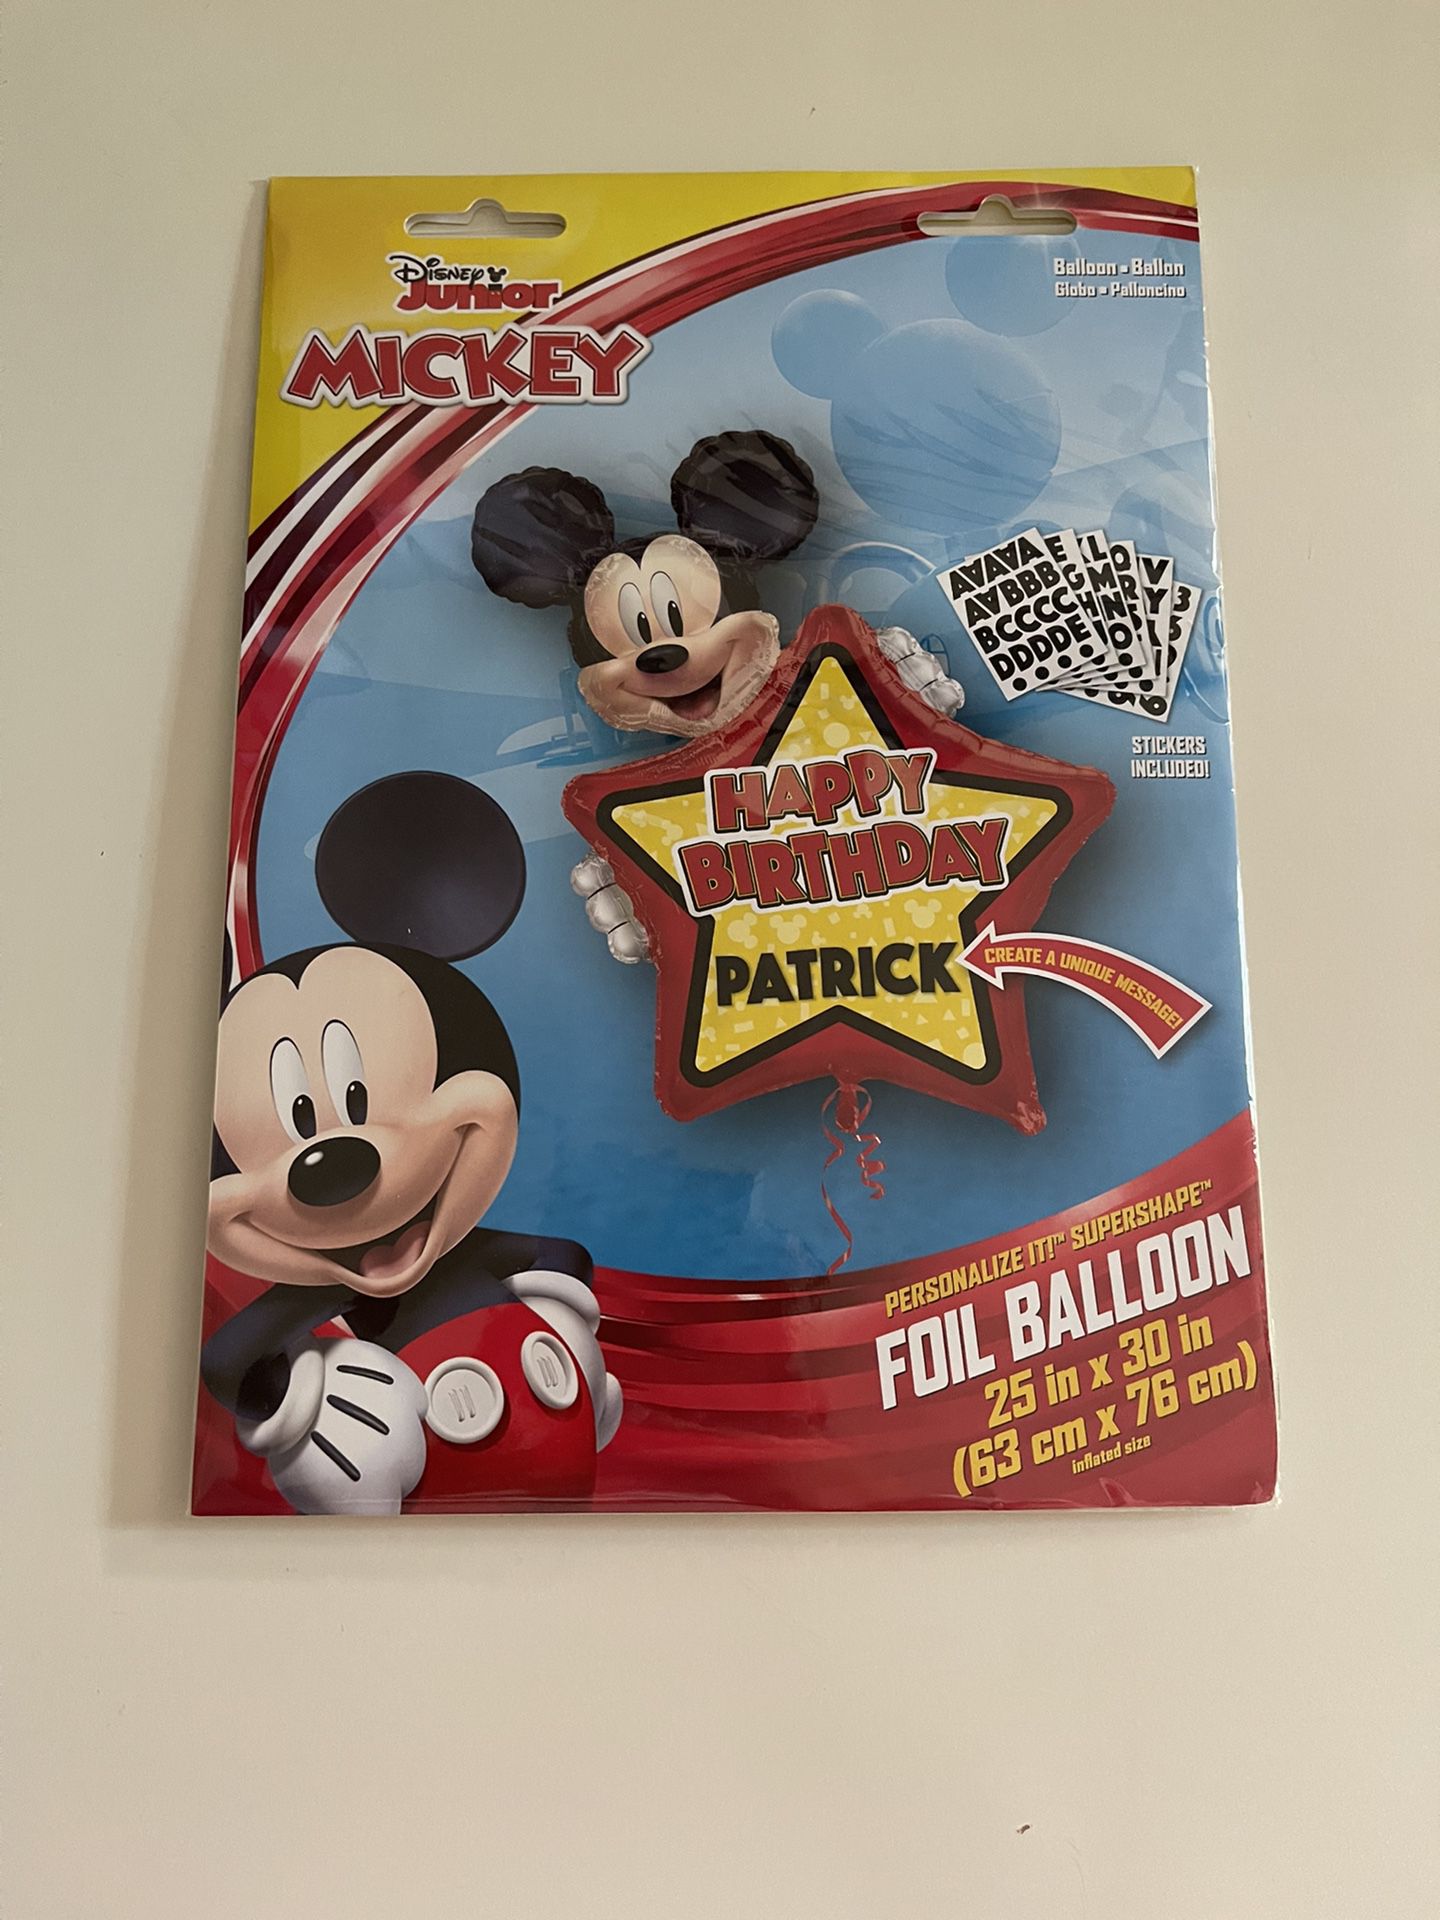 Mickey Foil Balloon Personalize With Name